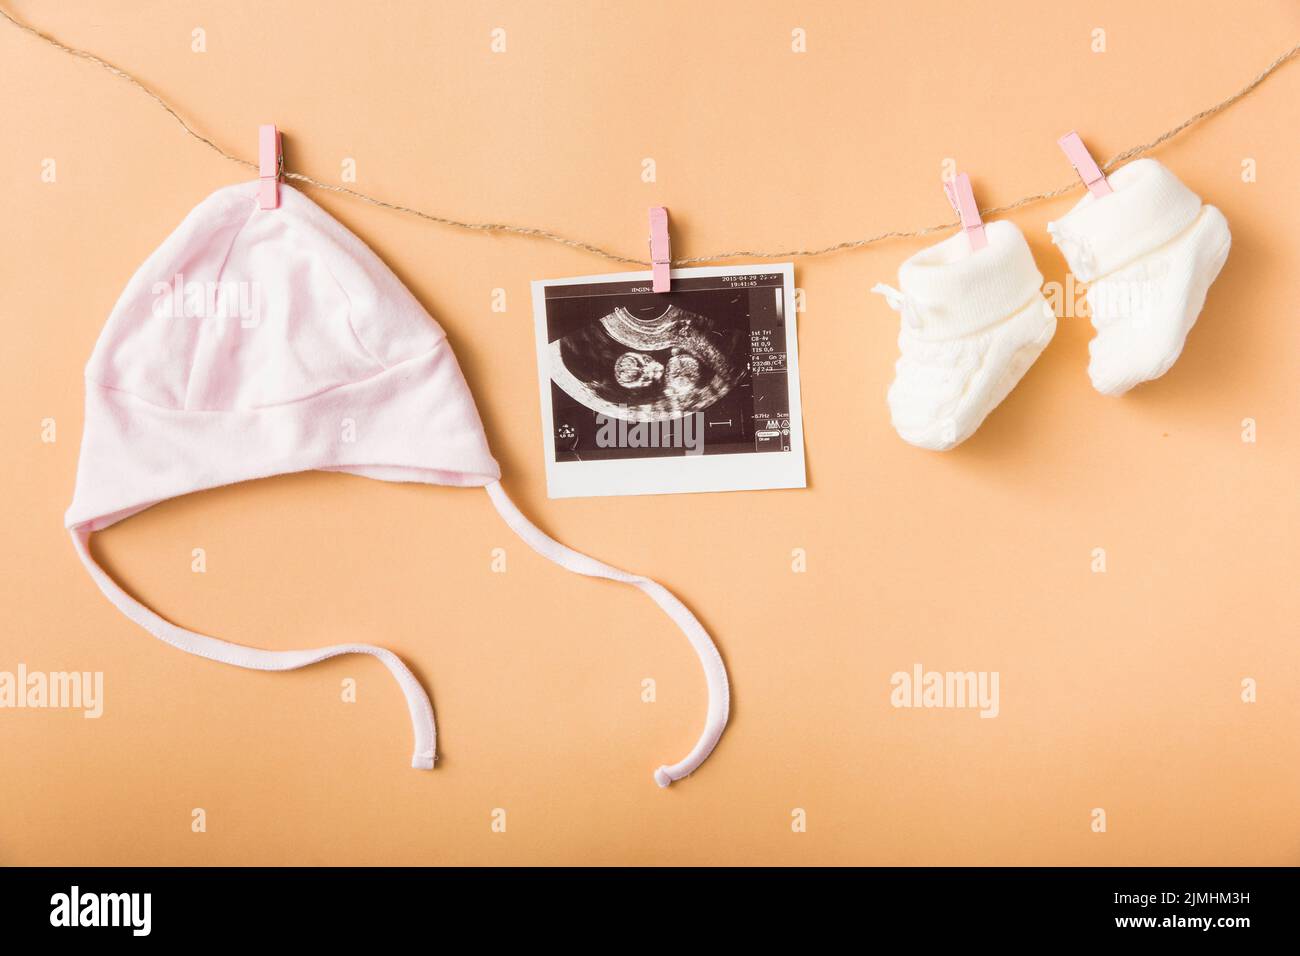 Baby s cap ultrasound picture pair woolen shoes hanging clothesline against orange backdrop Stock Photo